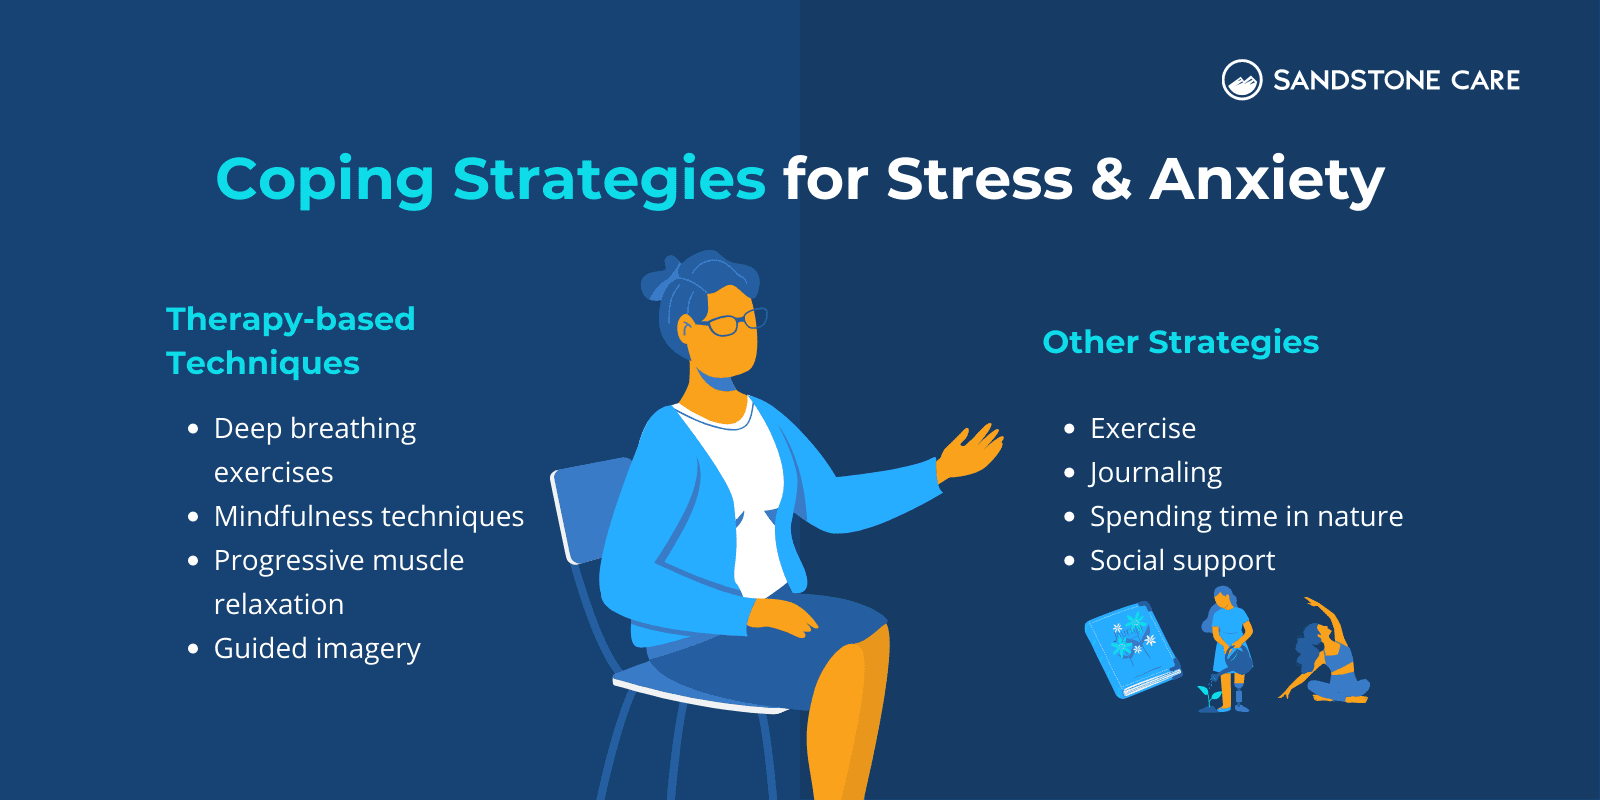 Coping Strategies For Stress & Anxiety are illustrated in two different categories of "therapy-based techniques" and all other strategies with relevant illustrations